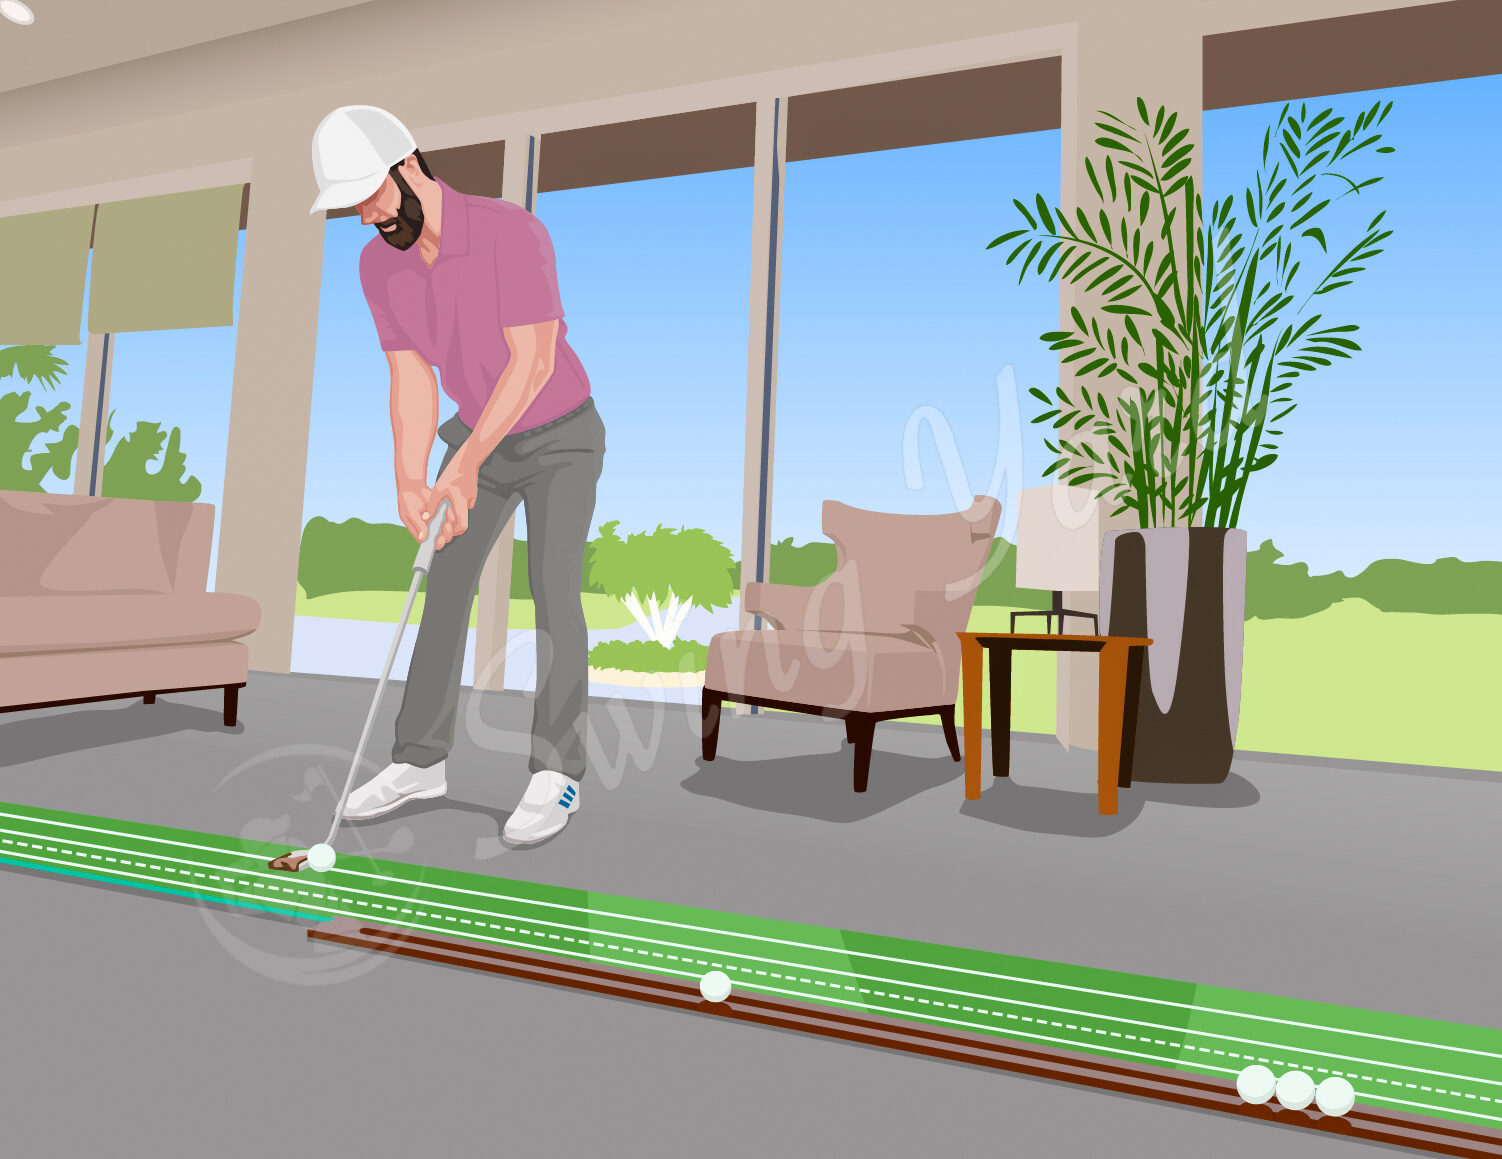 A golfer practicing on an indoor putting set